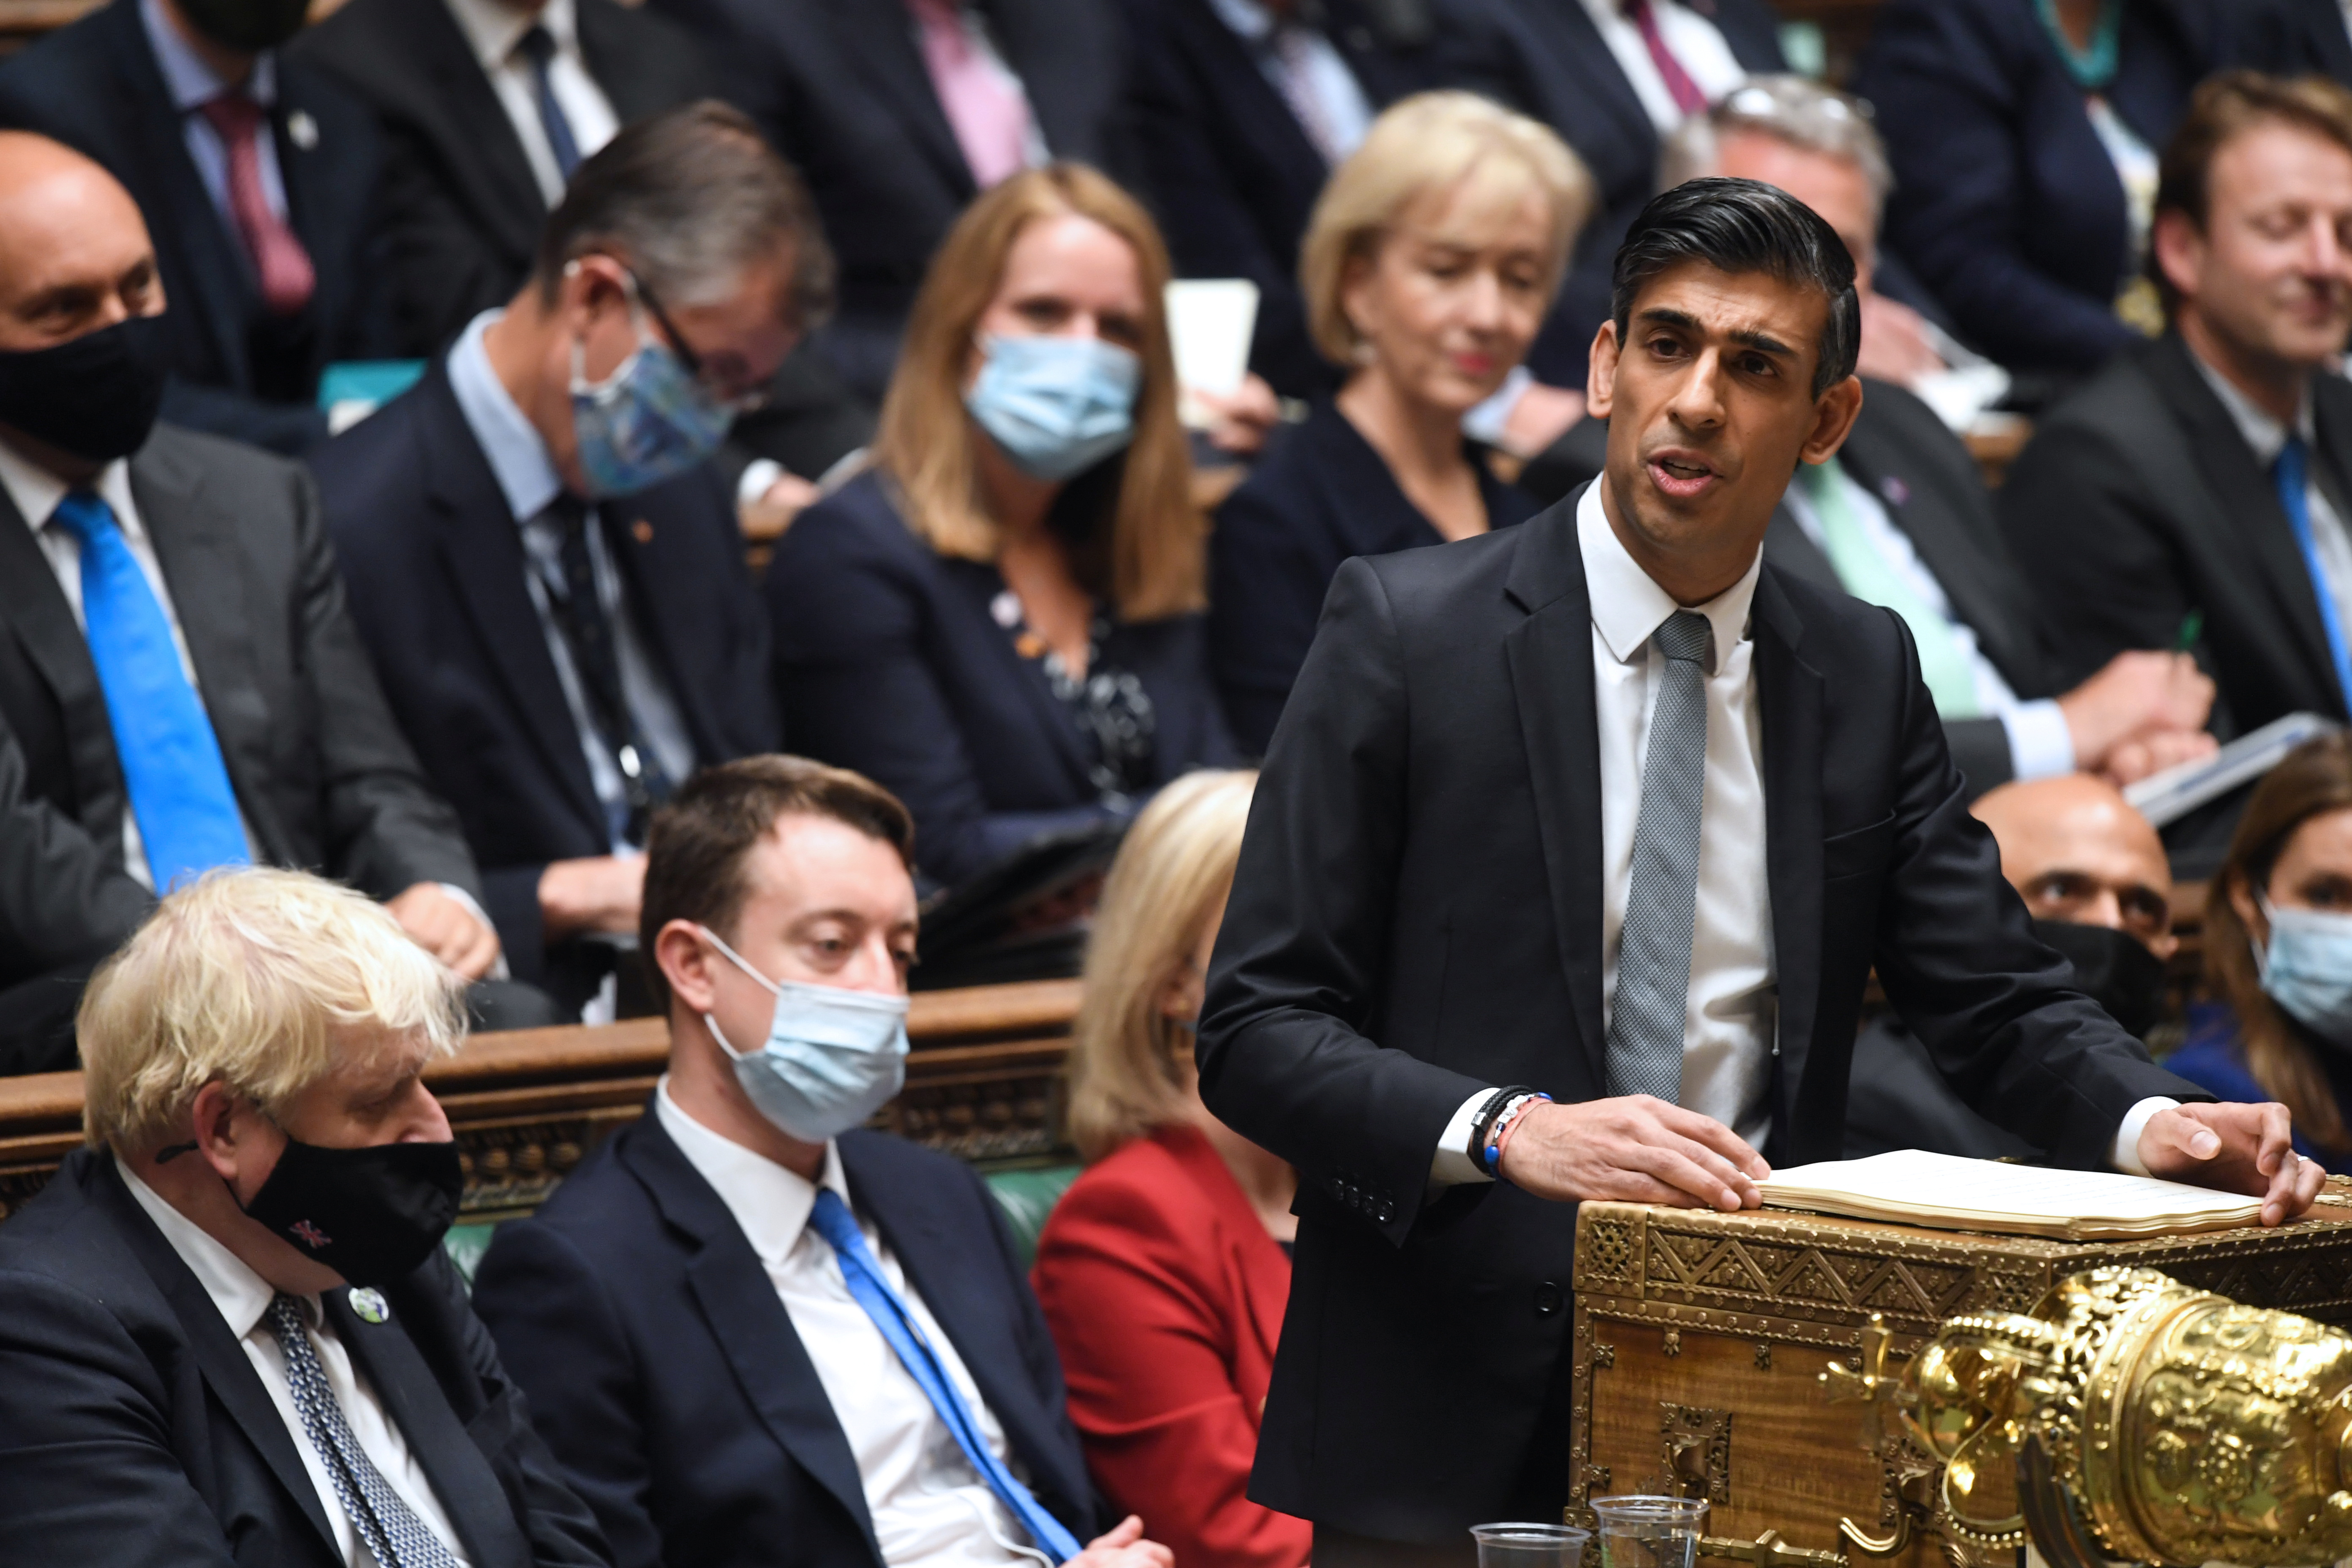 Britain's Chancellor of the Exchequer Rishi Sunak addresses lawmakers during a session on the budget at the Parliament, in London, Britain October 27, 2021. UK Parliament/Jessica Taylor/Handout via REUTERS